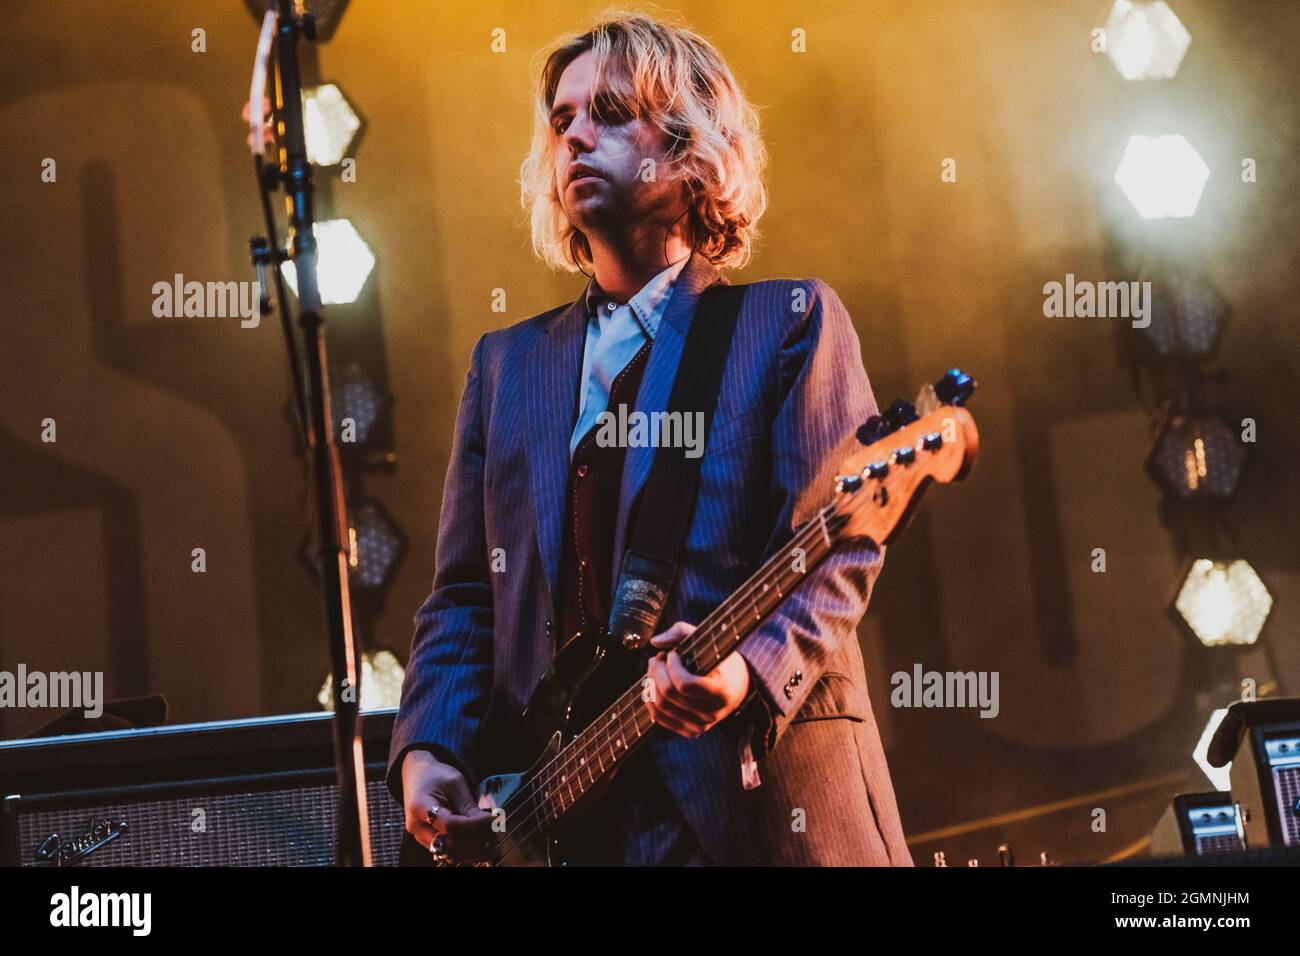 Newcastle, UK : 19.09.21 -  Fontaines DC perform on Day 3 of This Is Tomorrow Festival in Newcastle upon Tyne. Photo credit: Thomas Jackson / Alamy Live News. Stock Photo